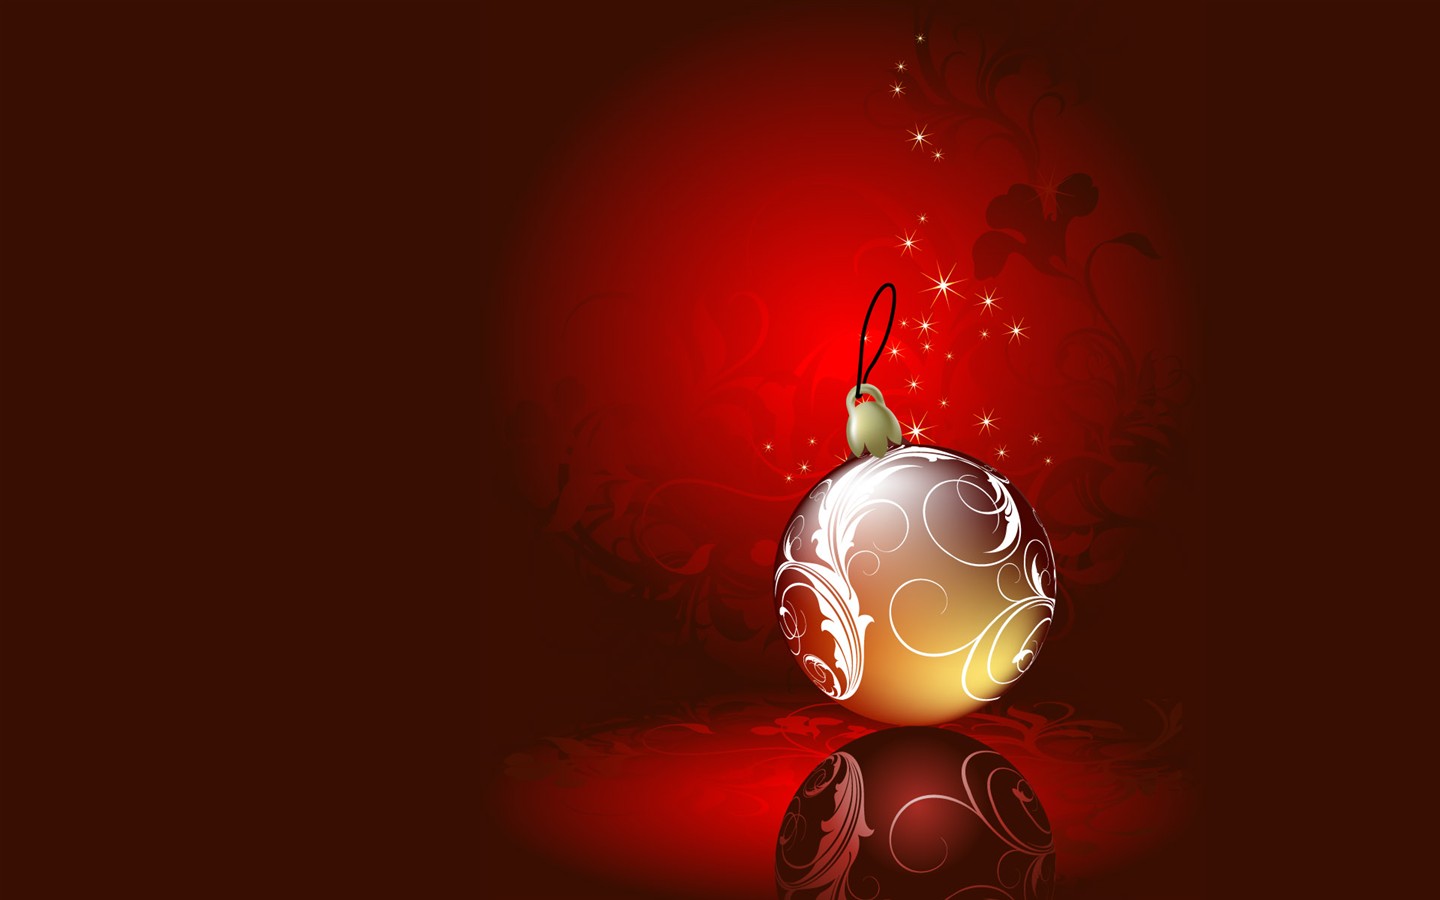 Exquisite Christmas Theme HD Wallpapers #28 - 1440x900